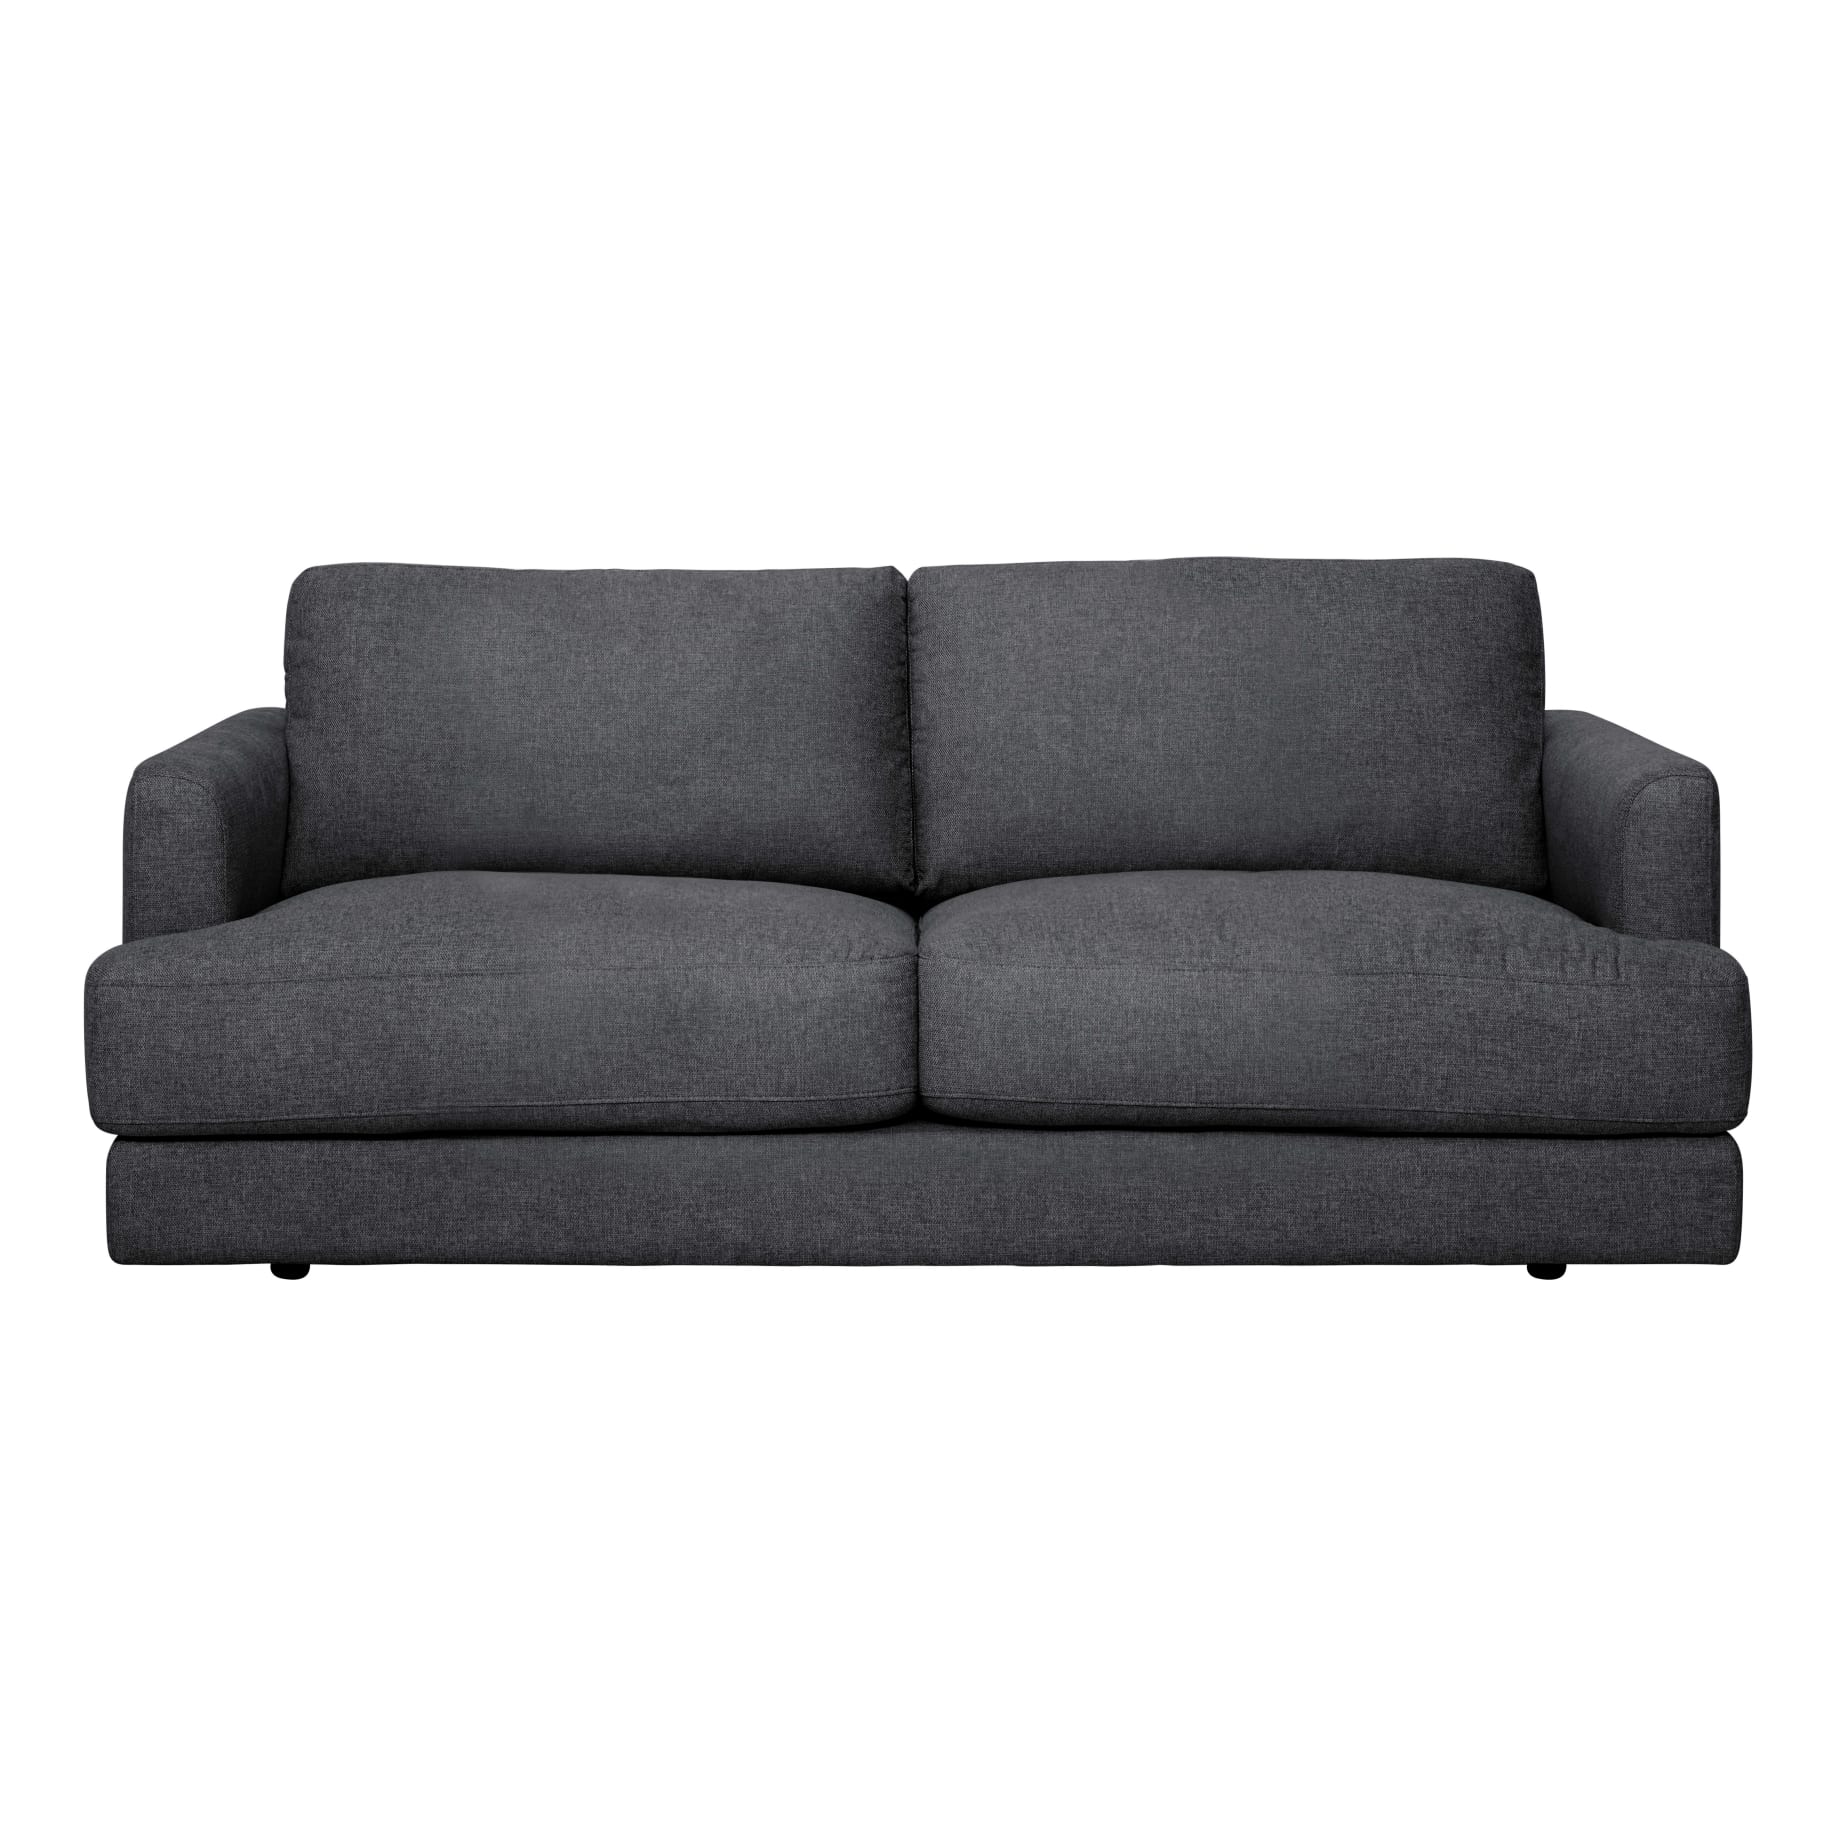 Temple 3 Seater with 2 Cushion in Belfast Charcoal